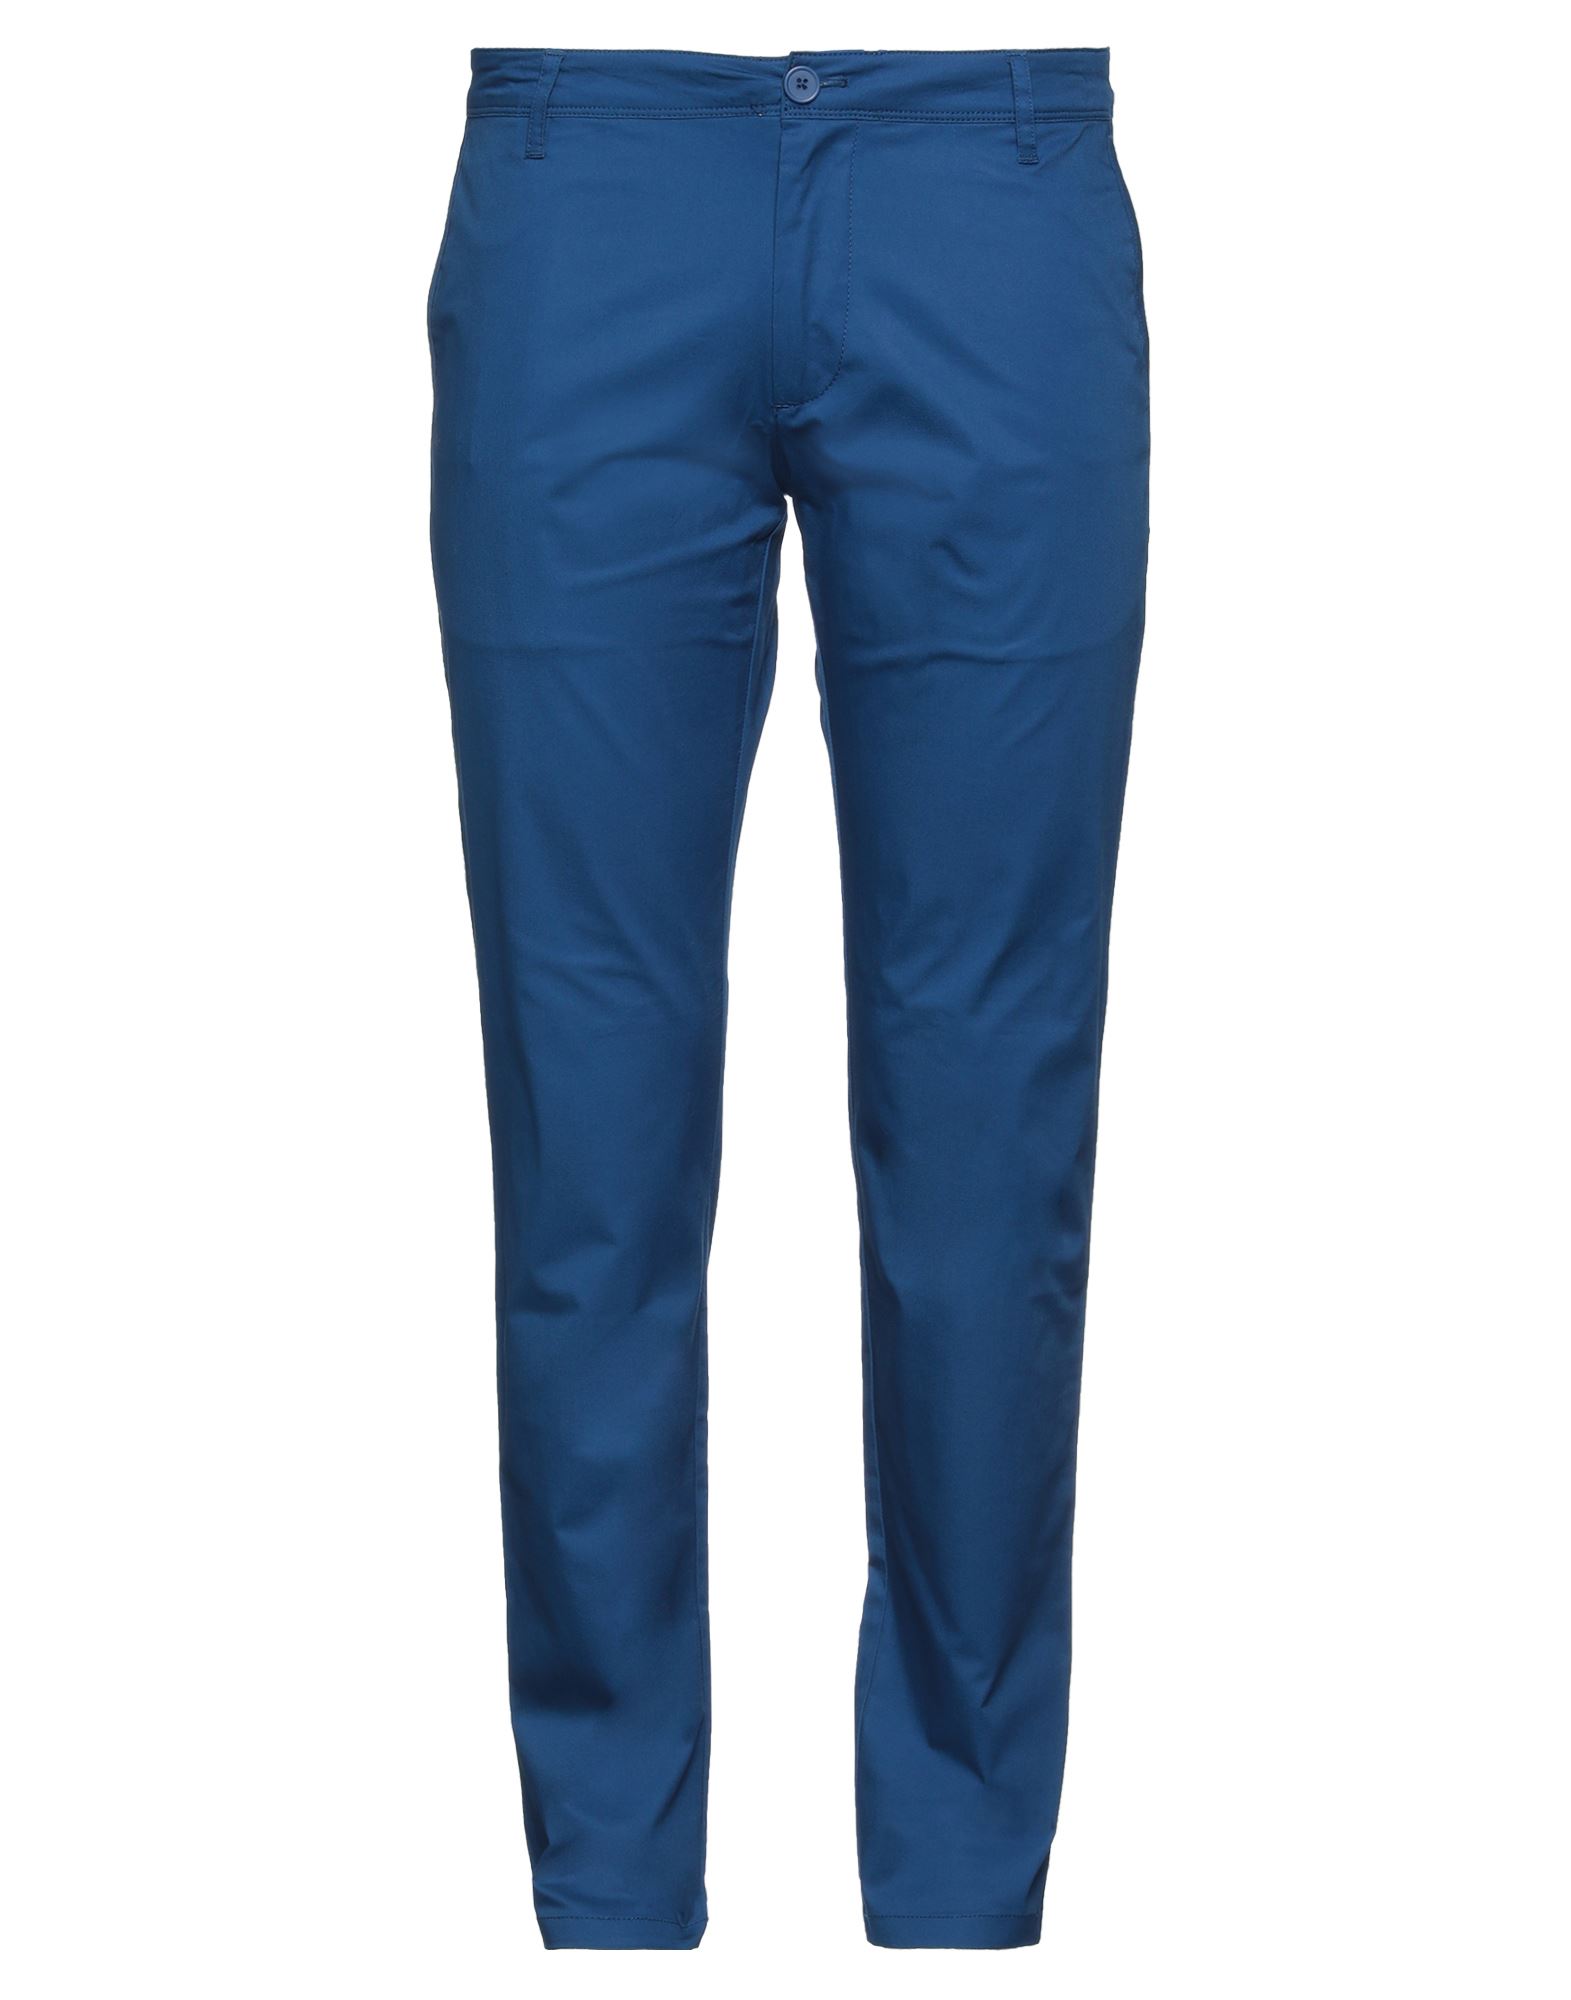 Armani Exchange Pants In Bright Blue